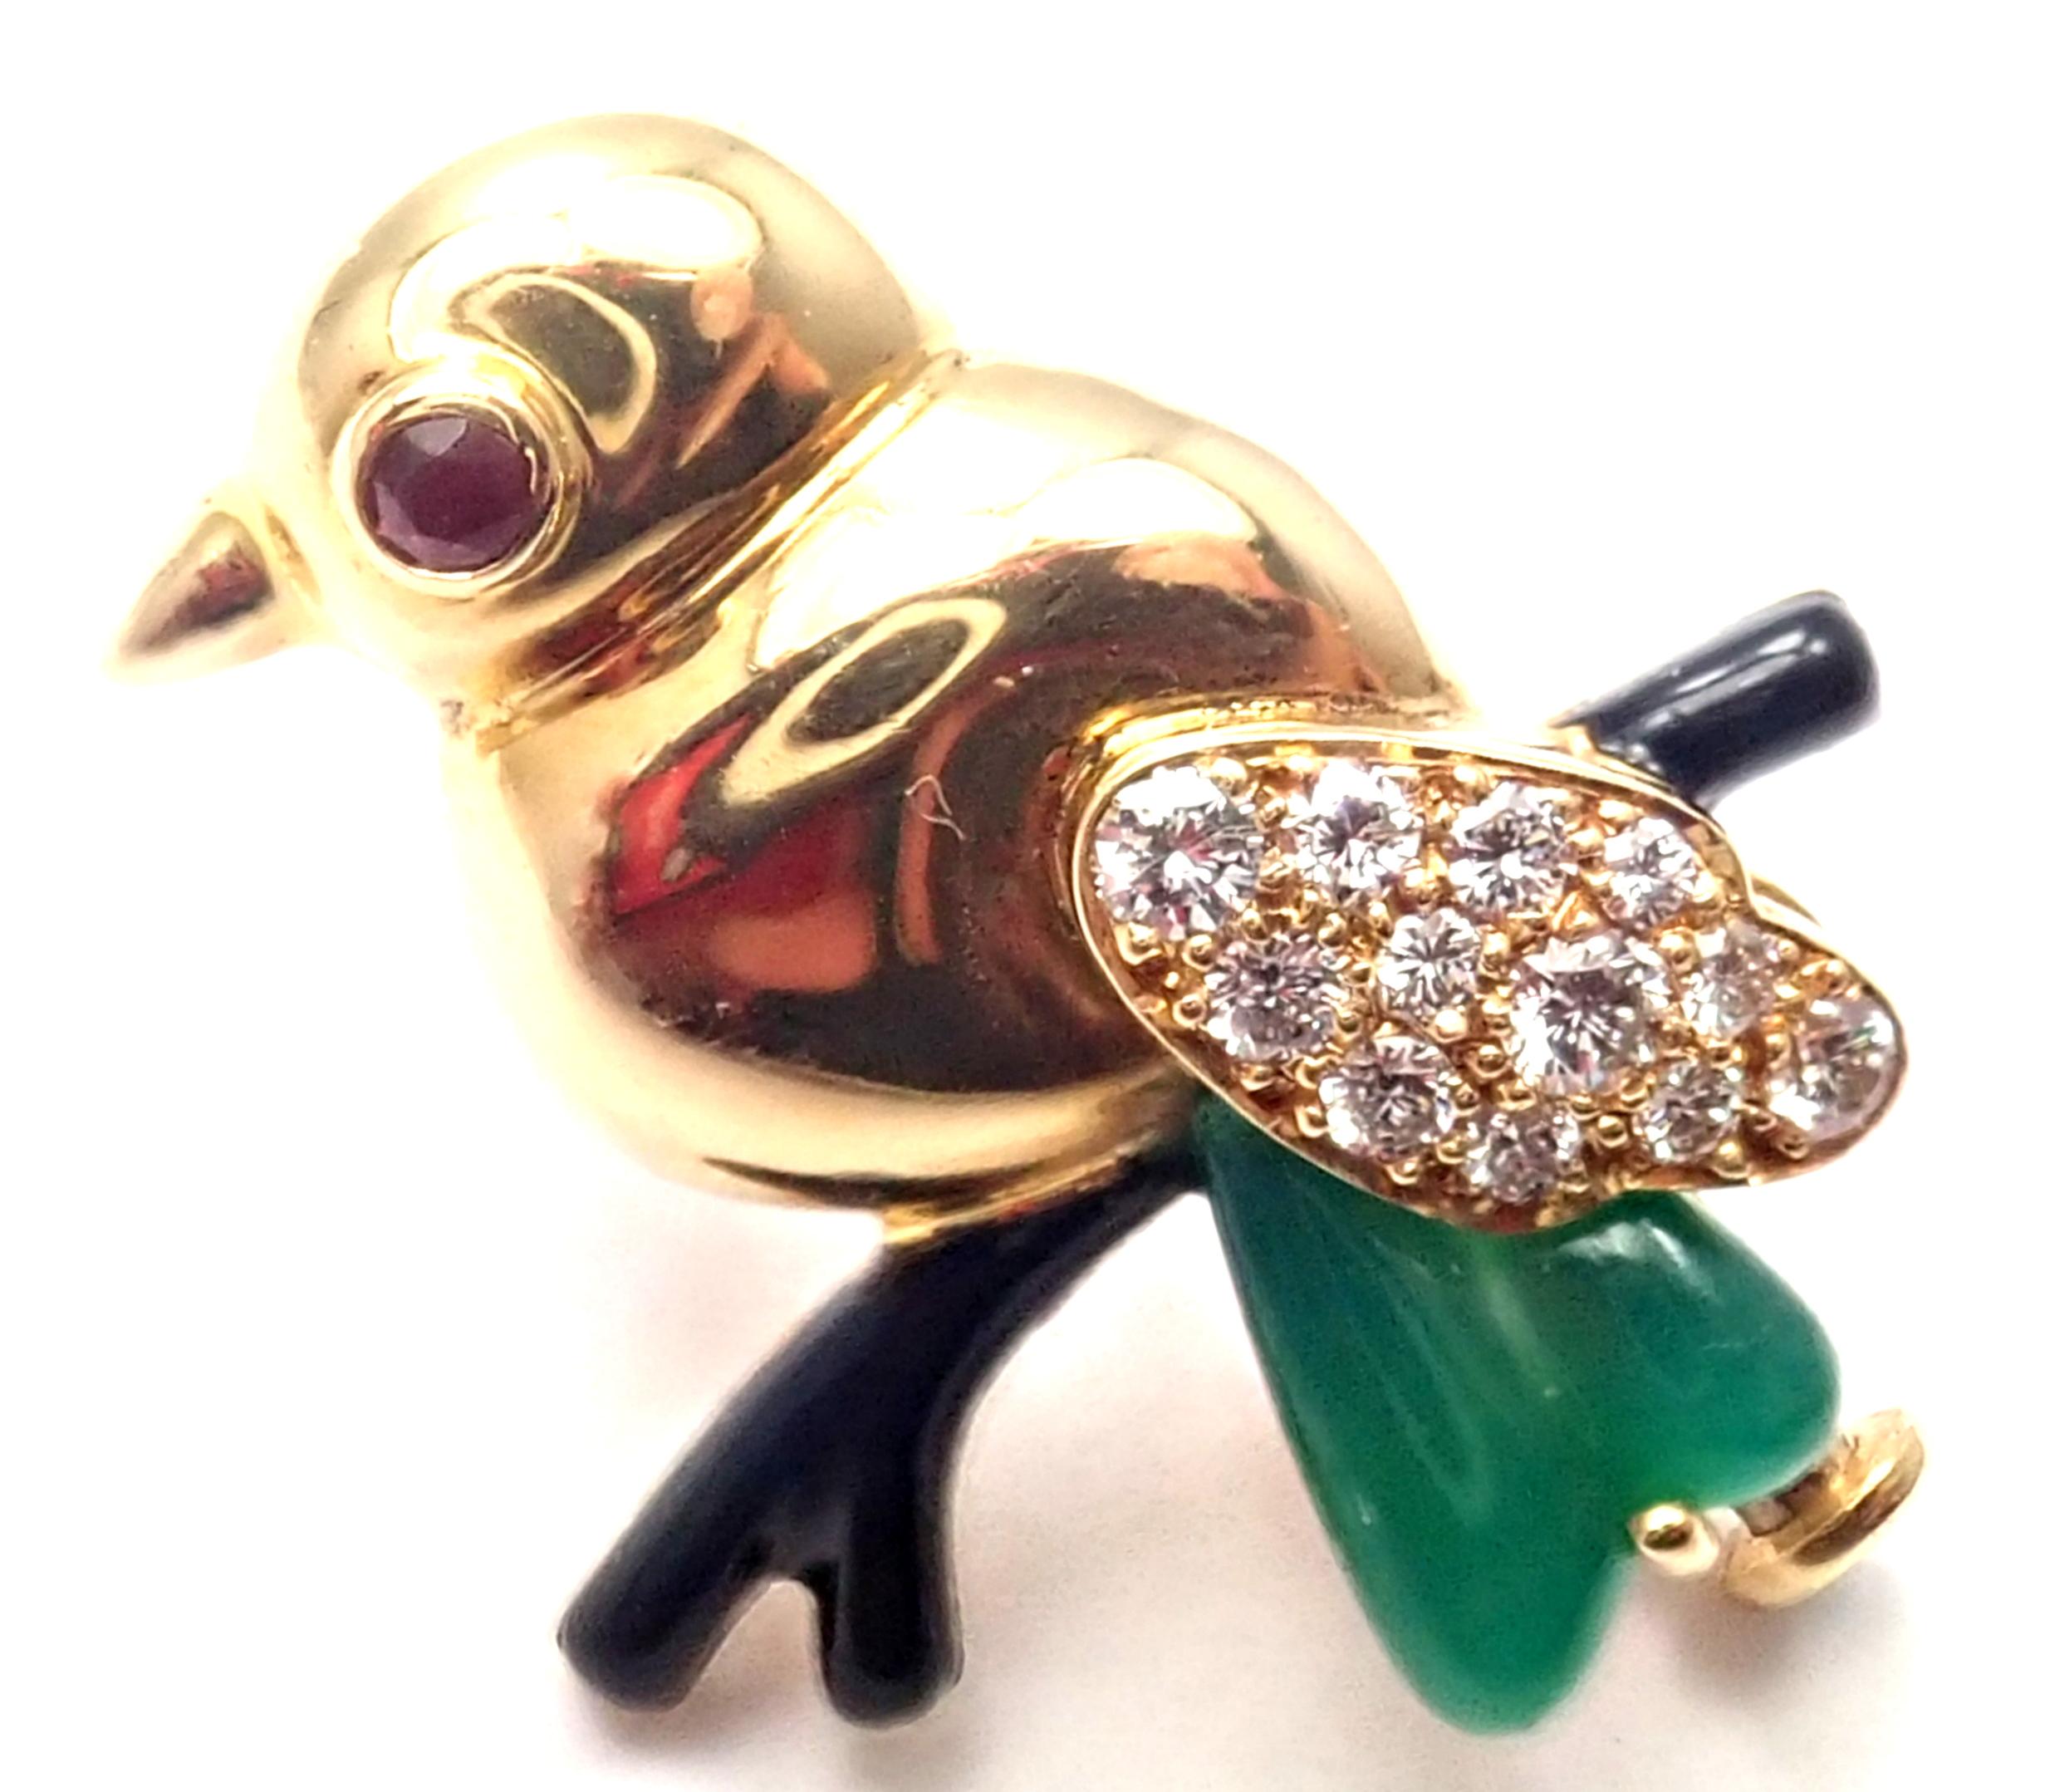 18k Yellow Gold Diamond Ruby Black Onyx & Chalcedony Bird Pins Brooches by Cartier.
With 12 round brilliant cut diamonds VVS1 clarity, E color. total weight in both .50ct
ruby, onyx & chalcedony
Details:
Weight: 7.3 grams
Measurements: 22mm x 19mm